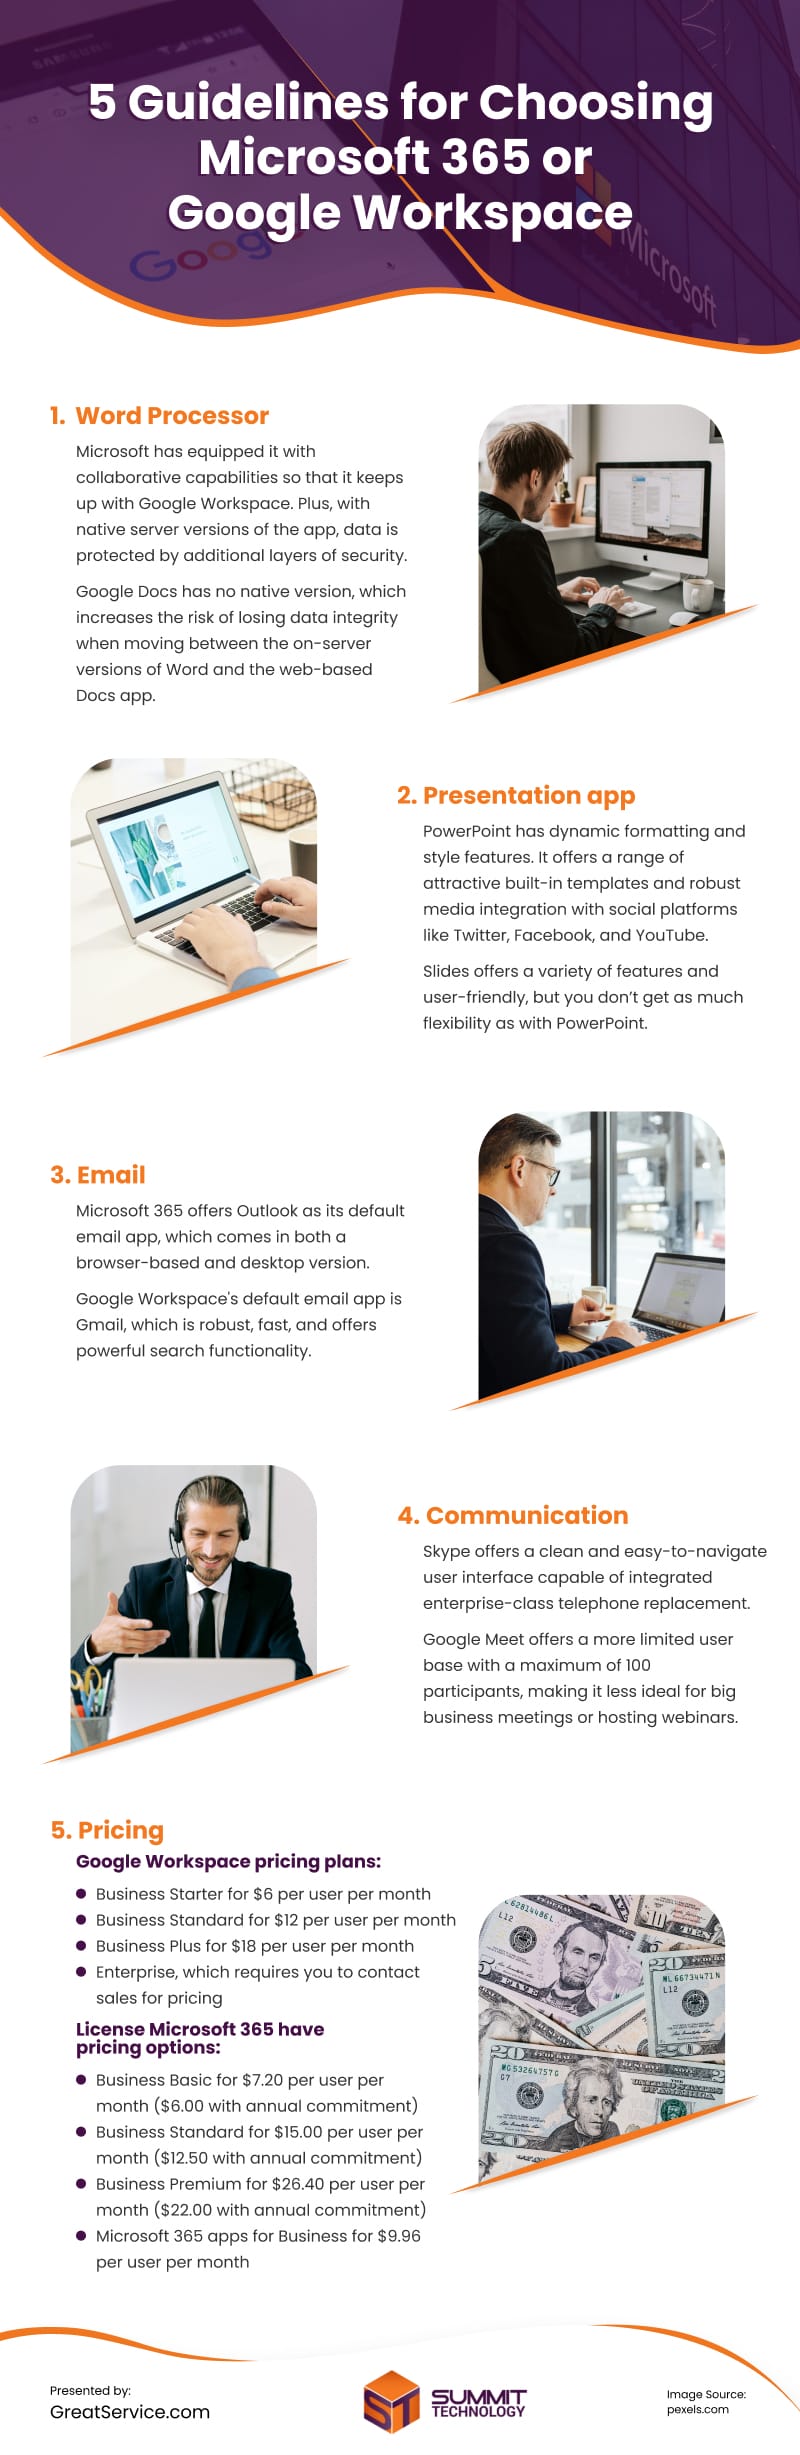 5 Guidelines for Choosing Microsoft 365 or Google Workspace Infographic